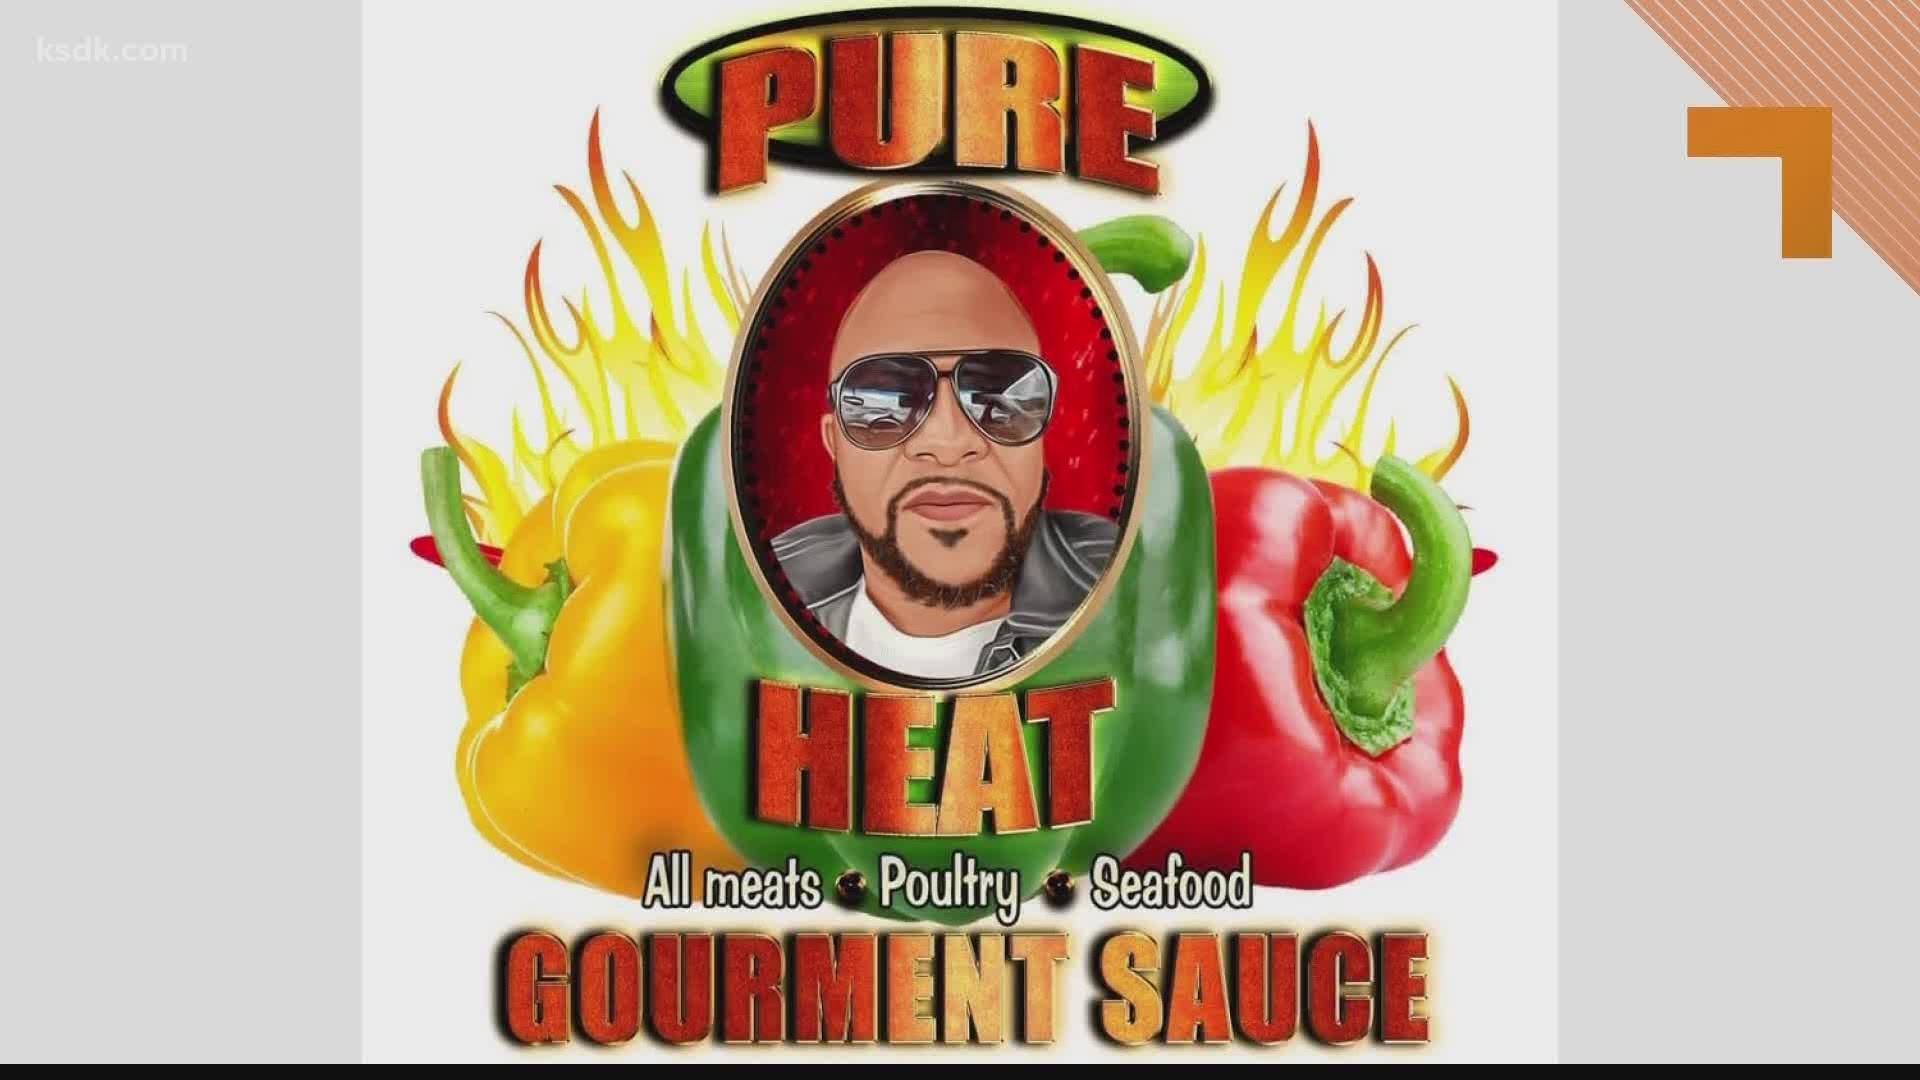 Check out this new gourmet "all sauce" that will be part of a socially distanced cook-off!